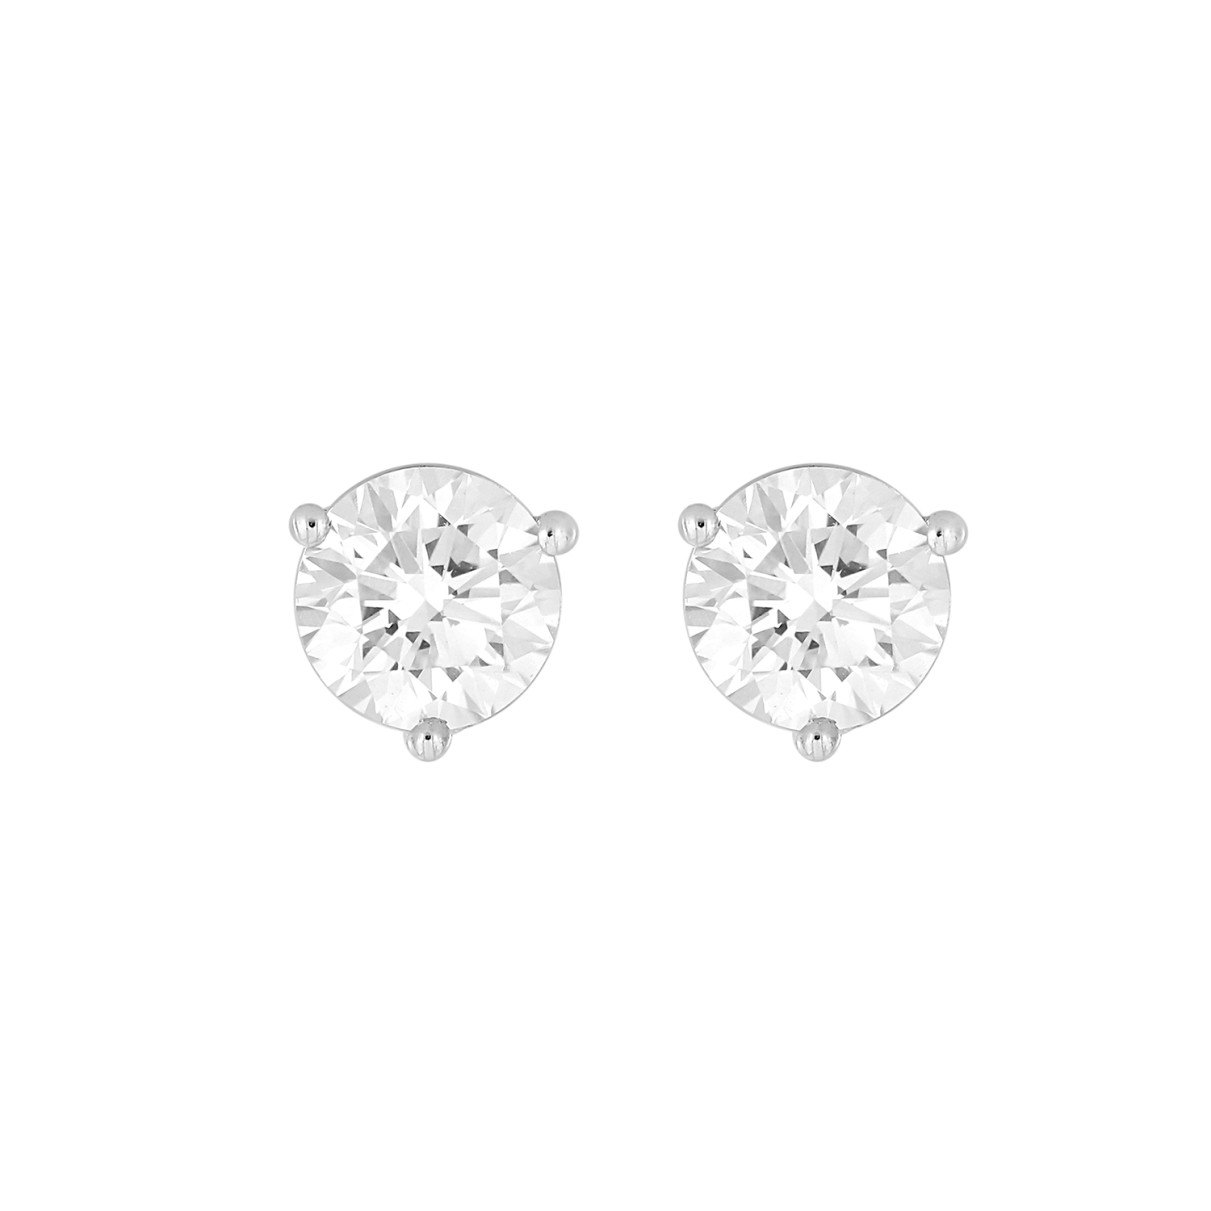 14K WHITE GOLD 2CT ROUND DIAMOND LADIES SOLITAIRE EARRINGS 